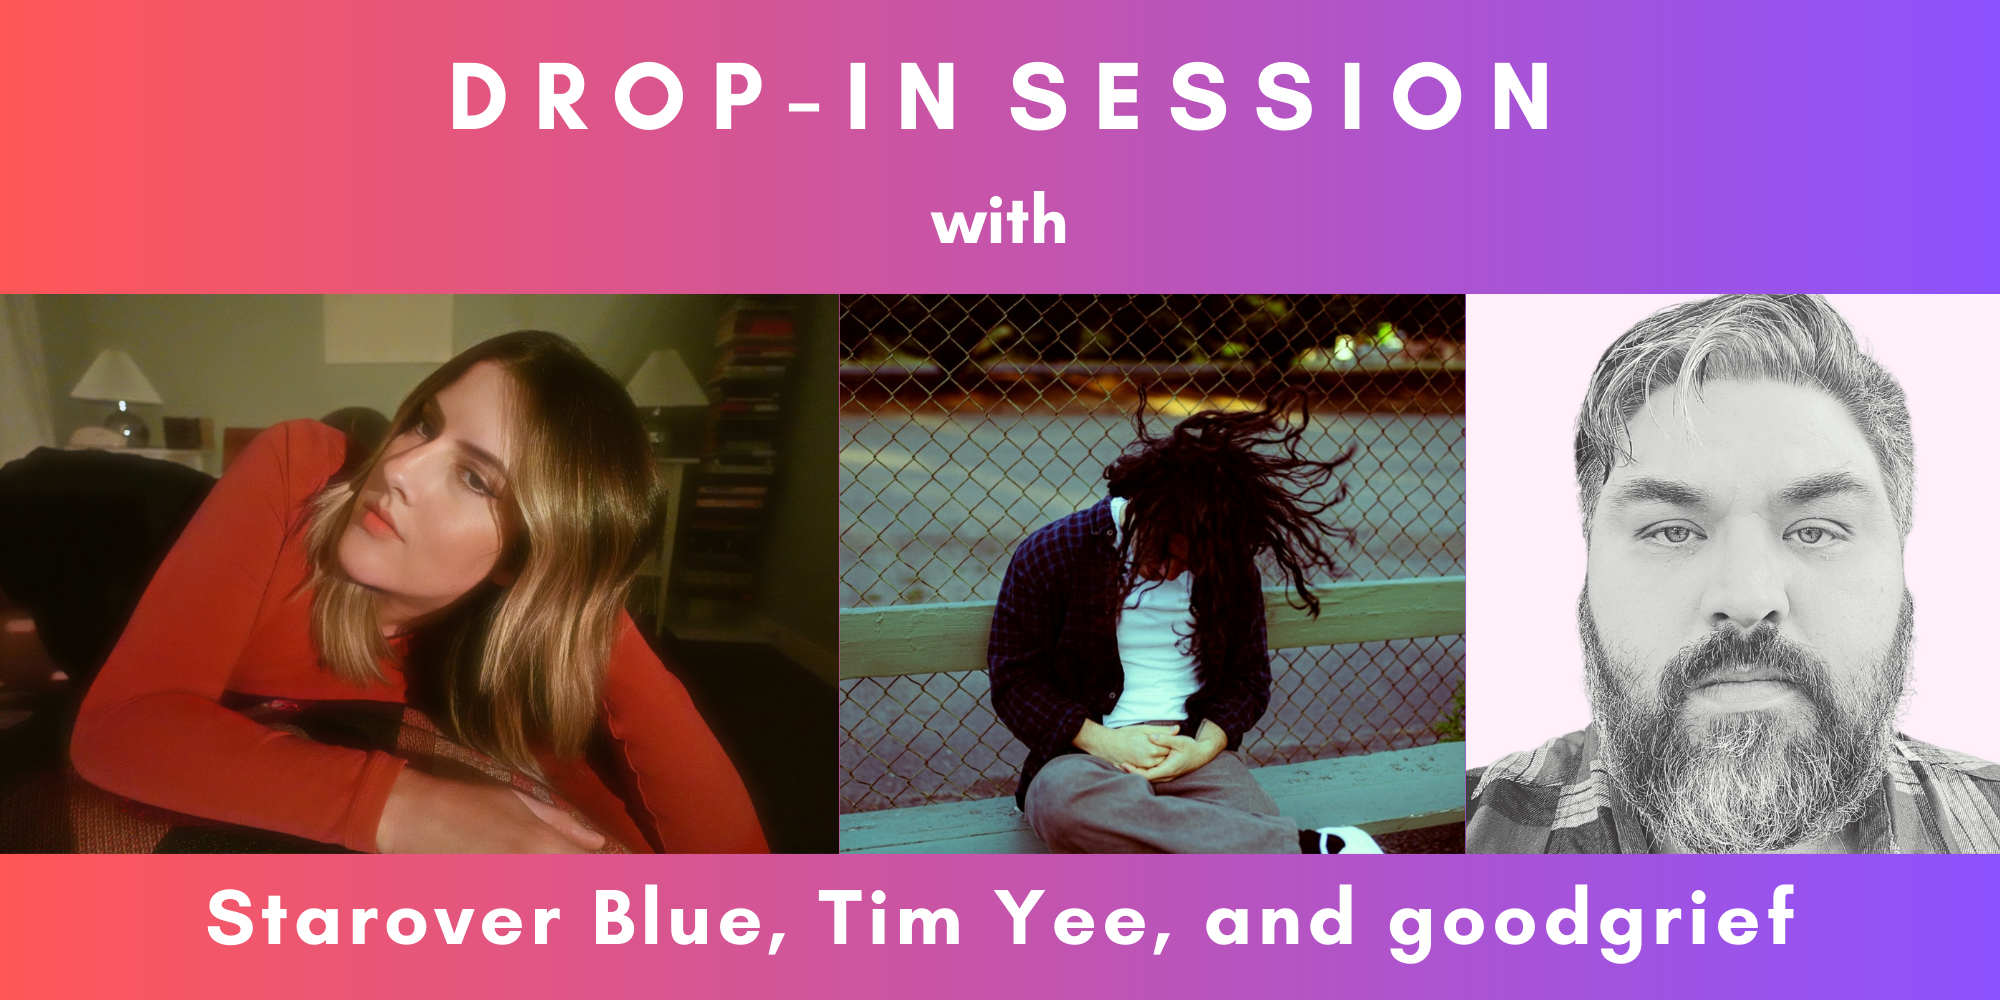 Drop-In Session with Starover Blue, Tim Yee & goodgrief